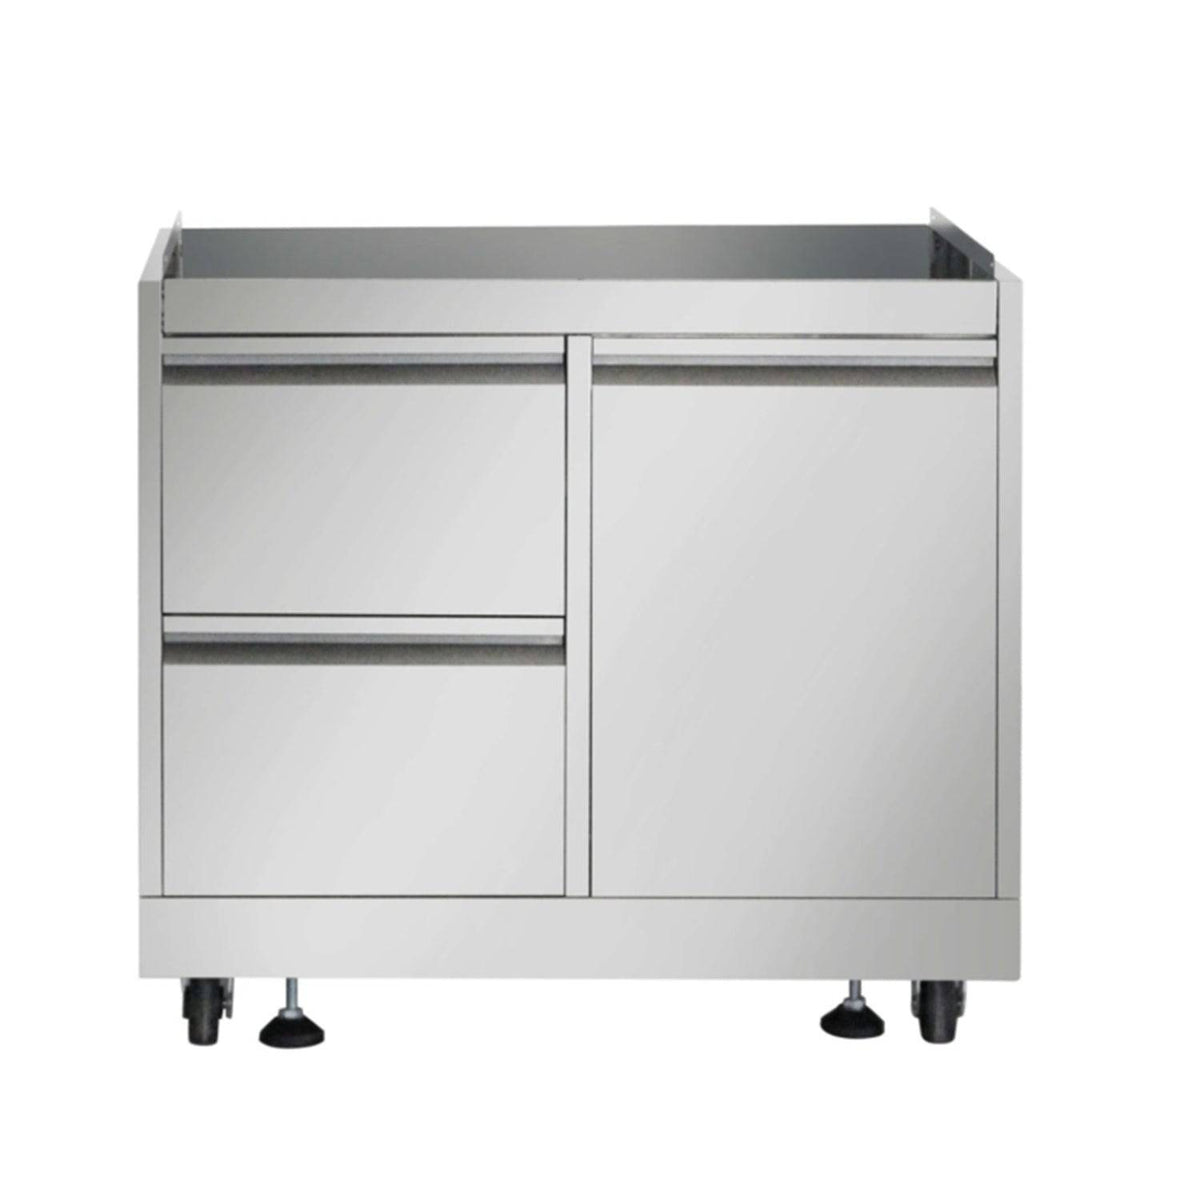 Fobest Outdoor Kitchen BBQ Grill Cabinet in Stainless Steel